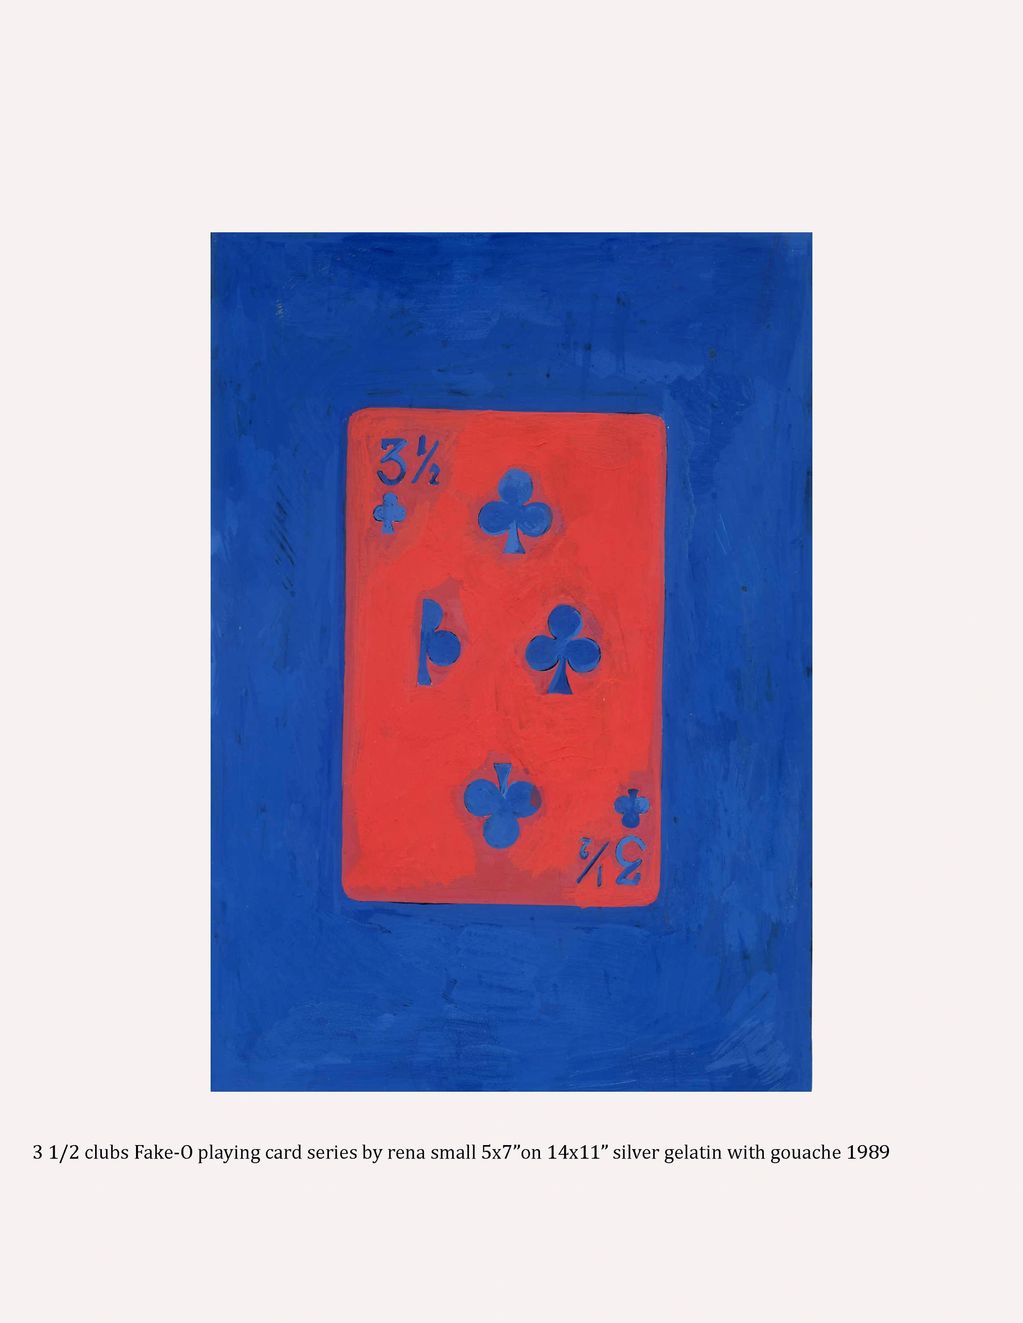 Clubs from the Fake O Deck of Playing cards painting 